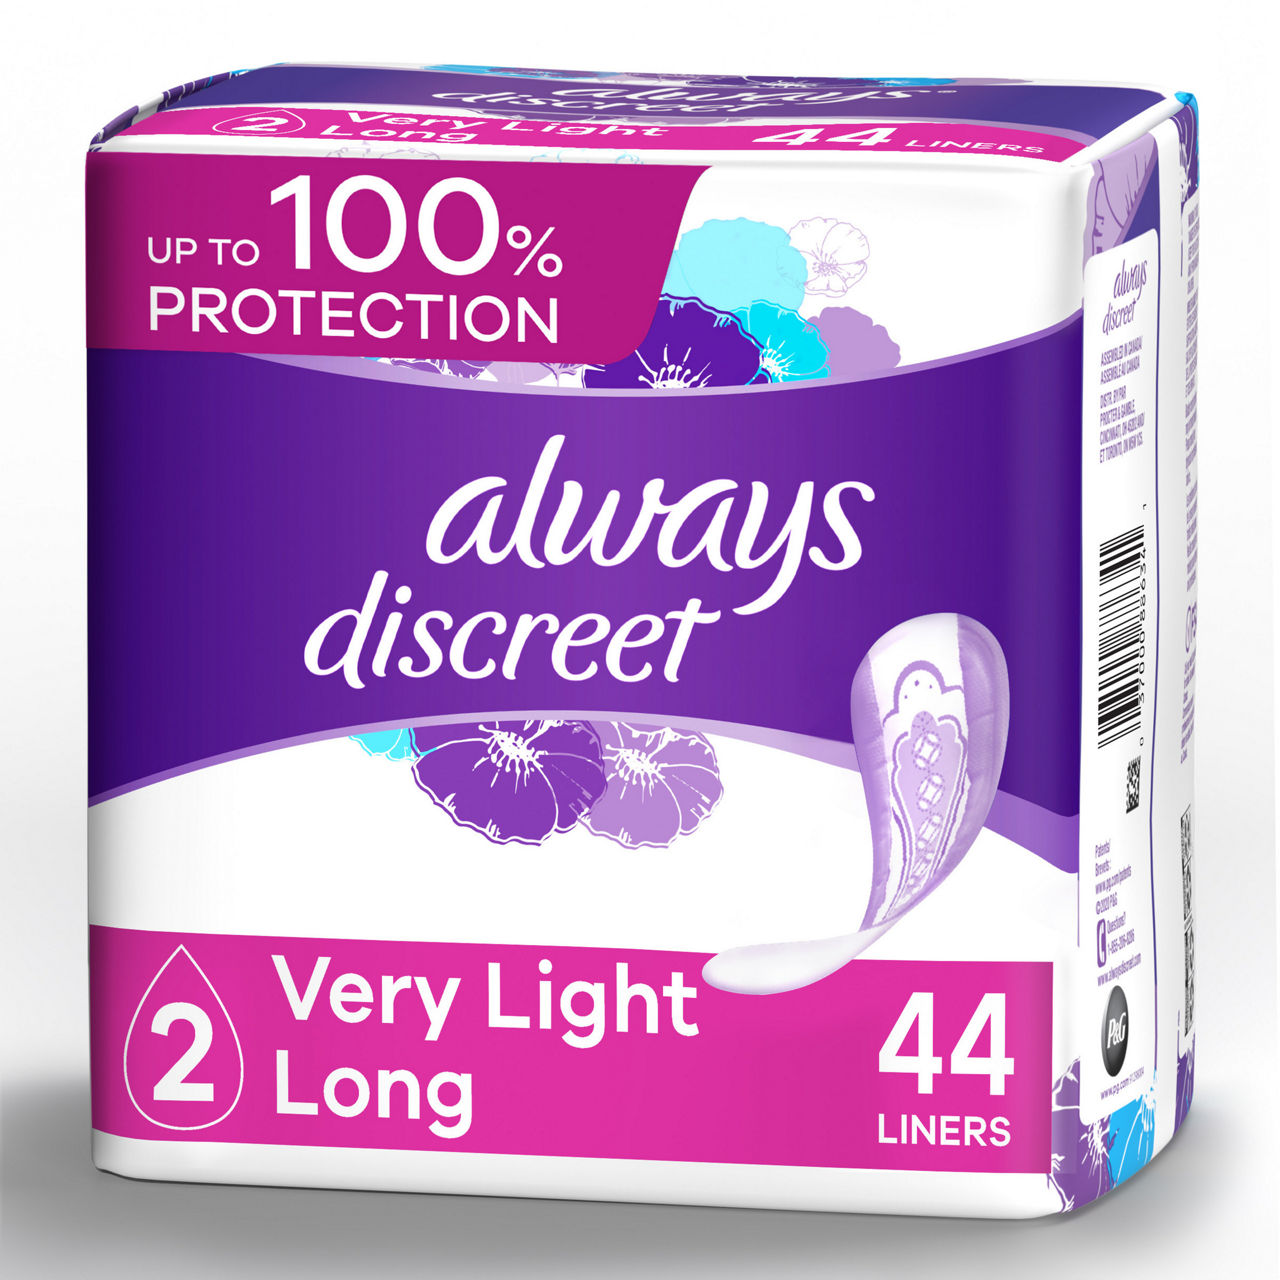 Poise Daily Incontinence Panty Liners, 2 Drop Very Light